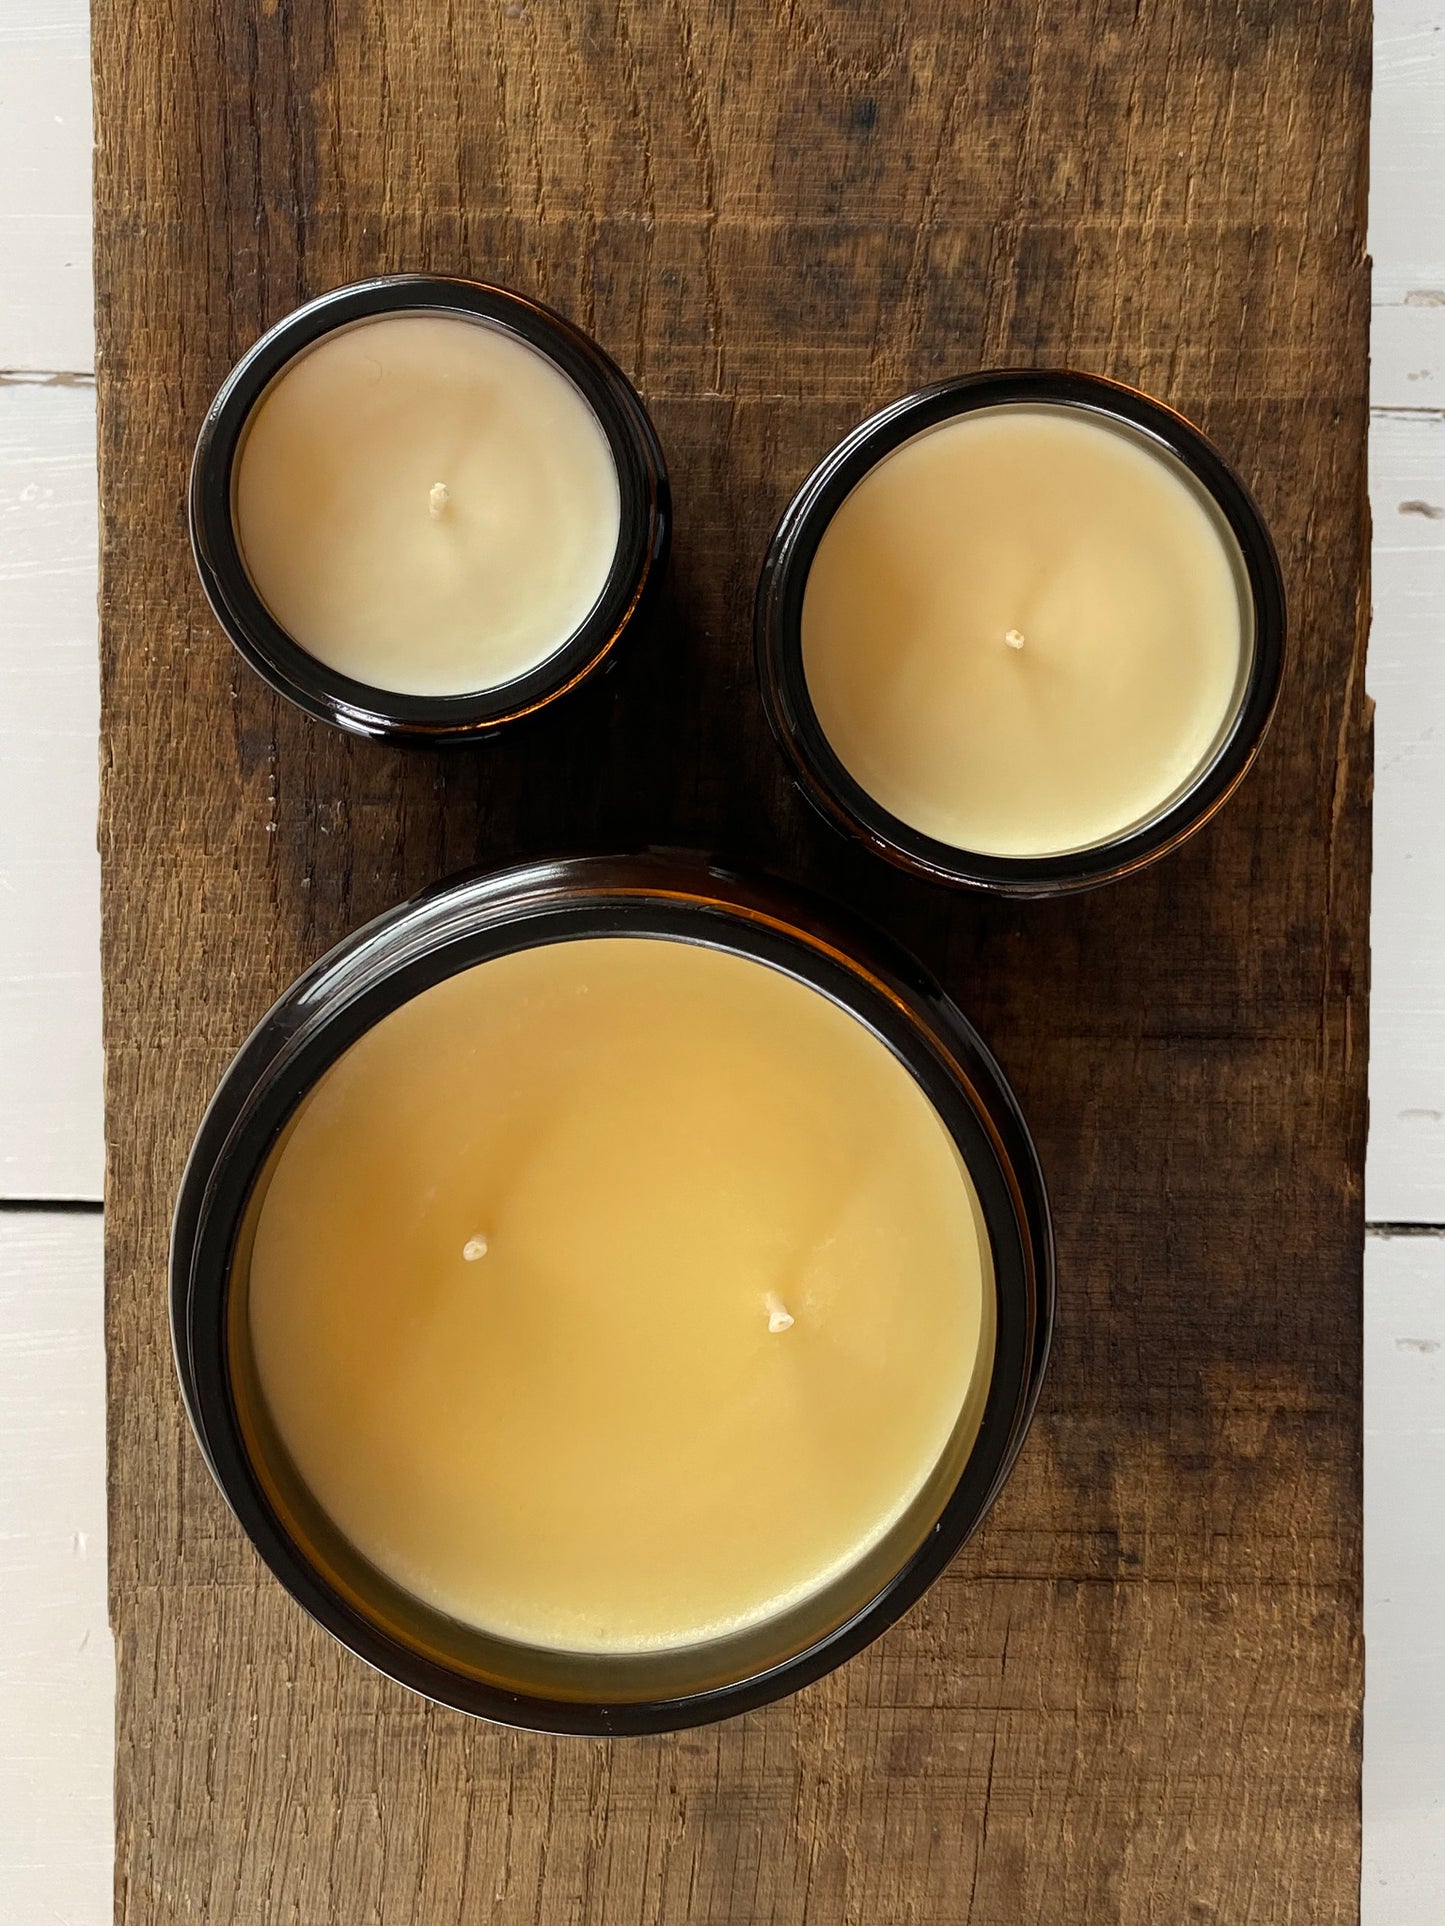 All natural candles in 3 sizes: 120ml, 180ml, 500ml. Made in London & Brighton